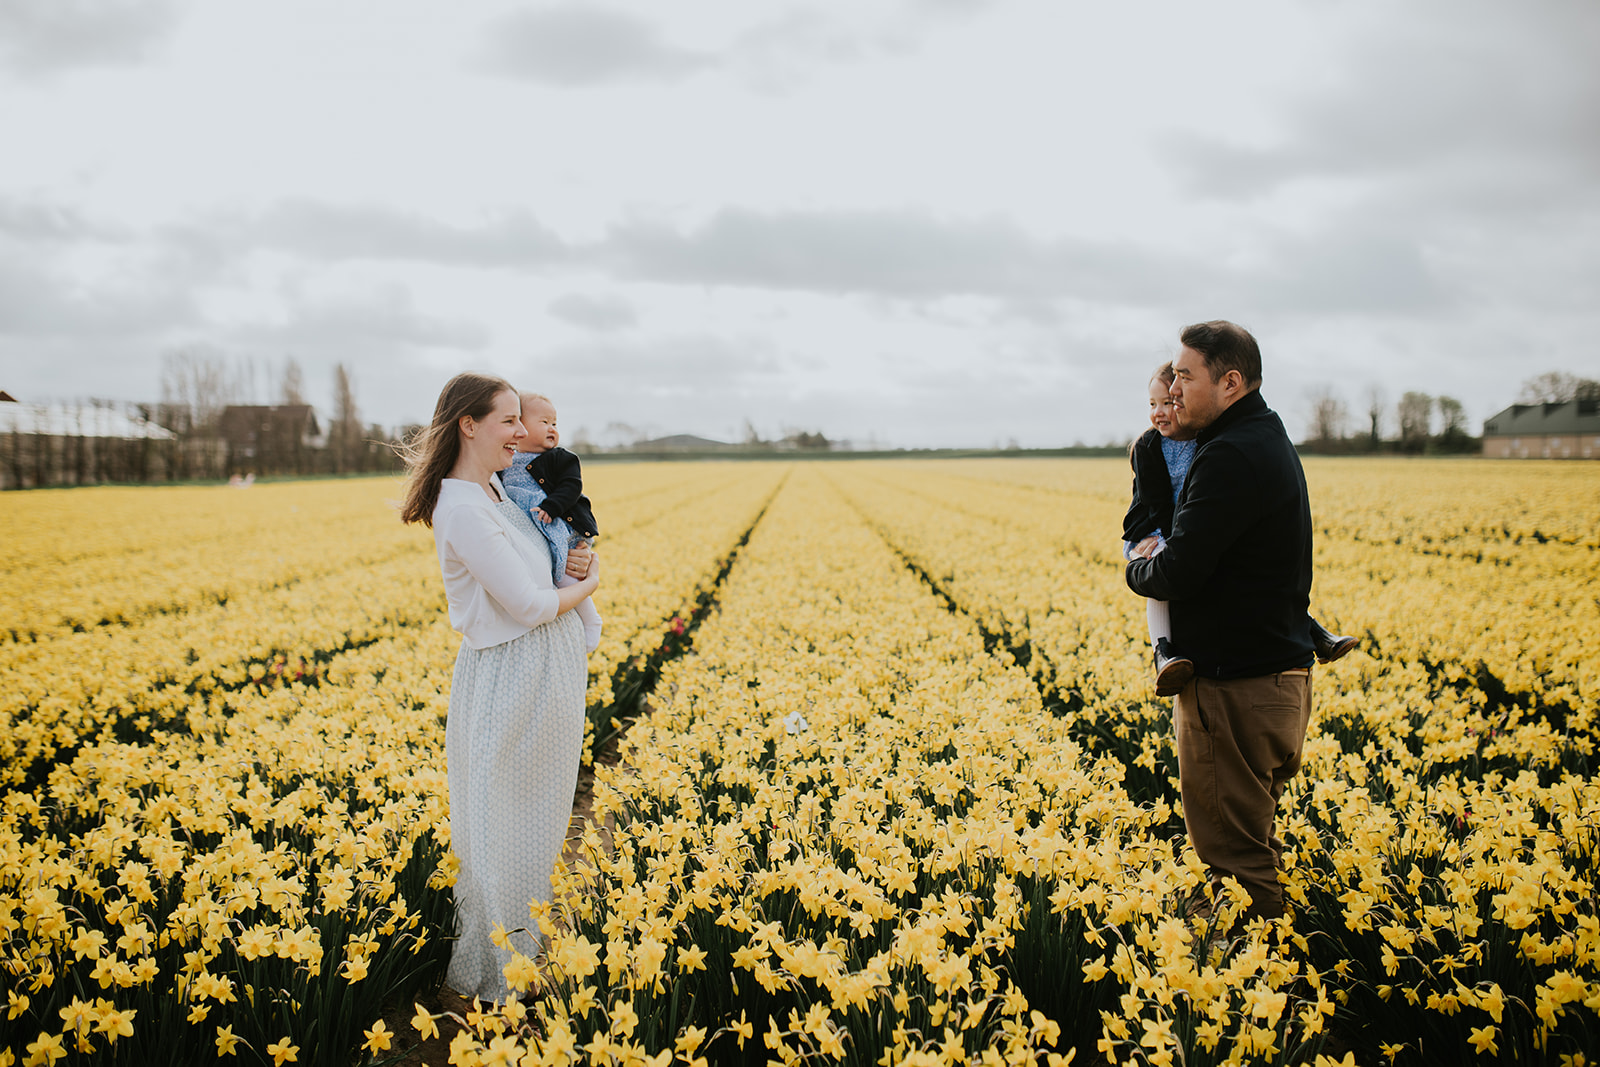 Family photoshoot at the daffodils fields